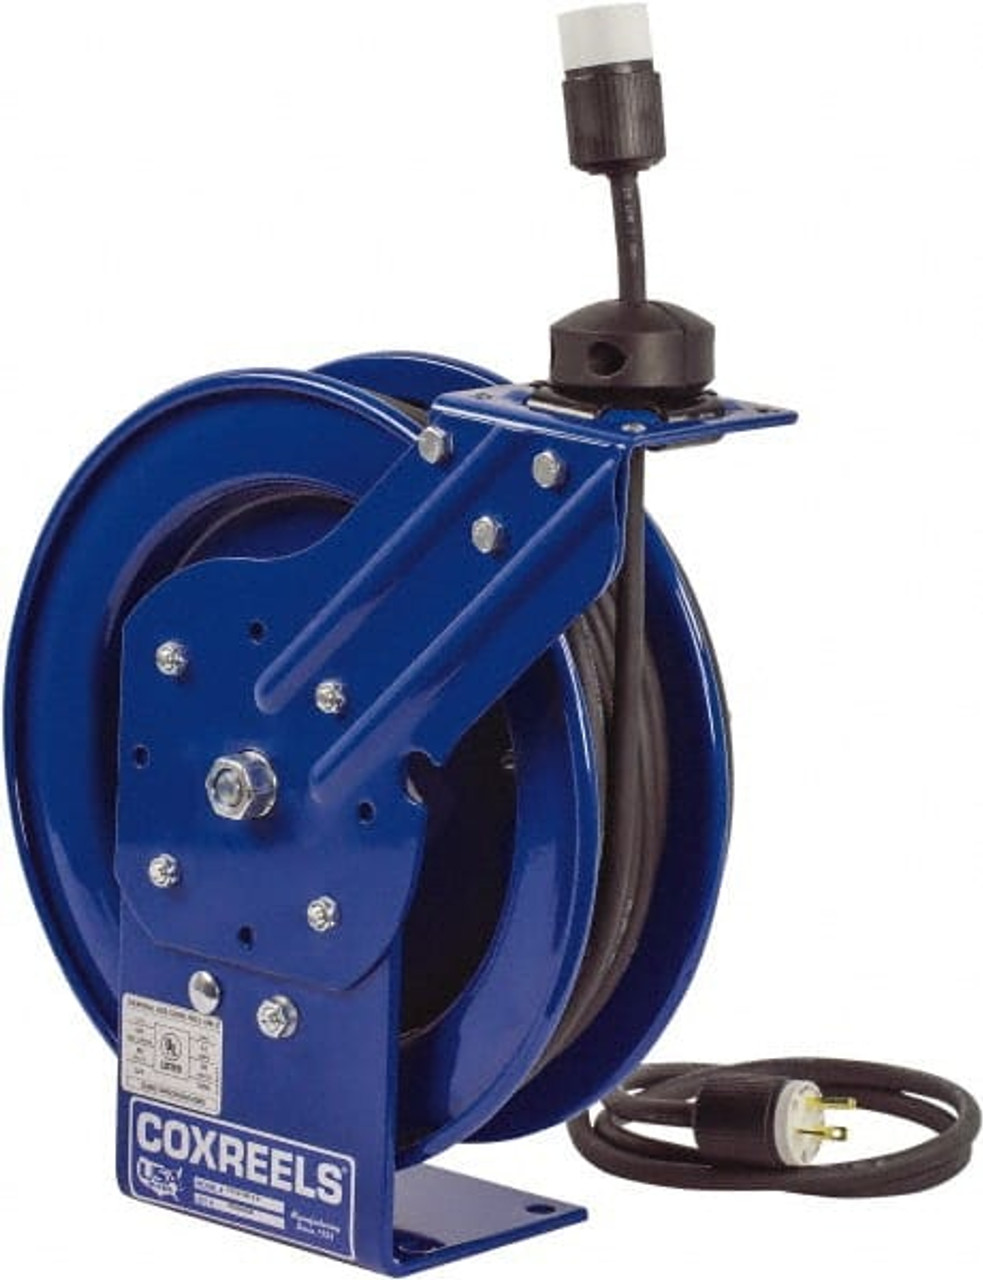 Coxreels 12 AWG, 50 ft. Cable Length, Cord & Cable Reel with Outlet End 1  Outlet, NEMA 5-20R, 20 Amps, 115 Volts, SJO Cable, Blue Reel, Spring Driven  Reel PC13-5012-A - 73856049 - Penn Tool Co., Inc